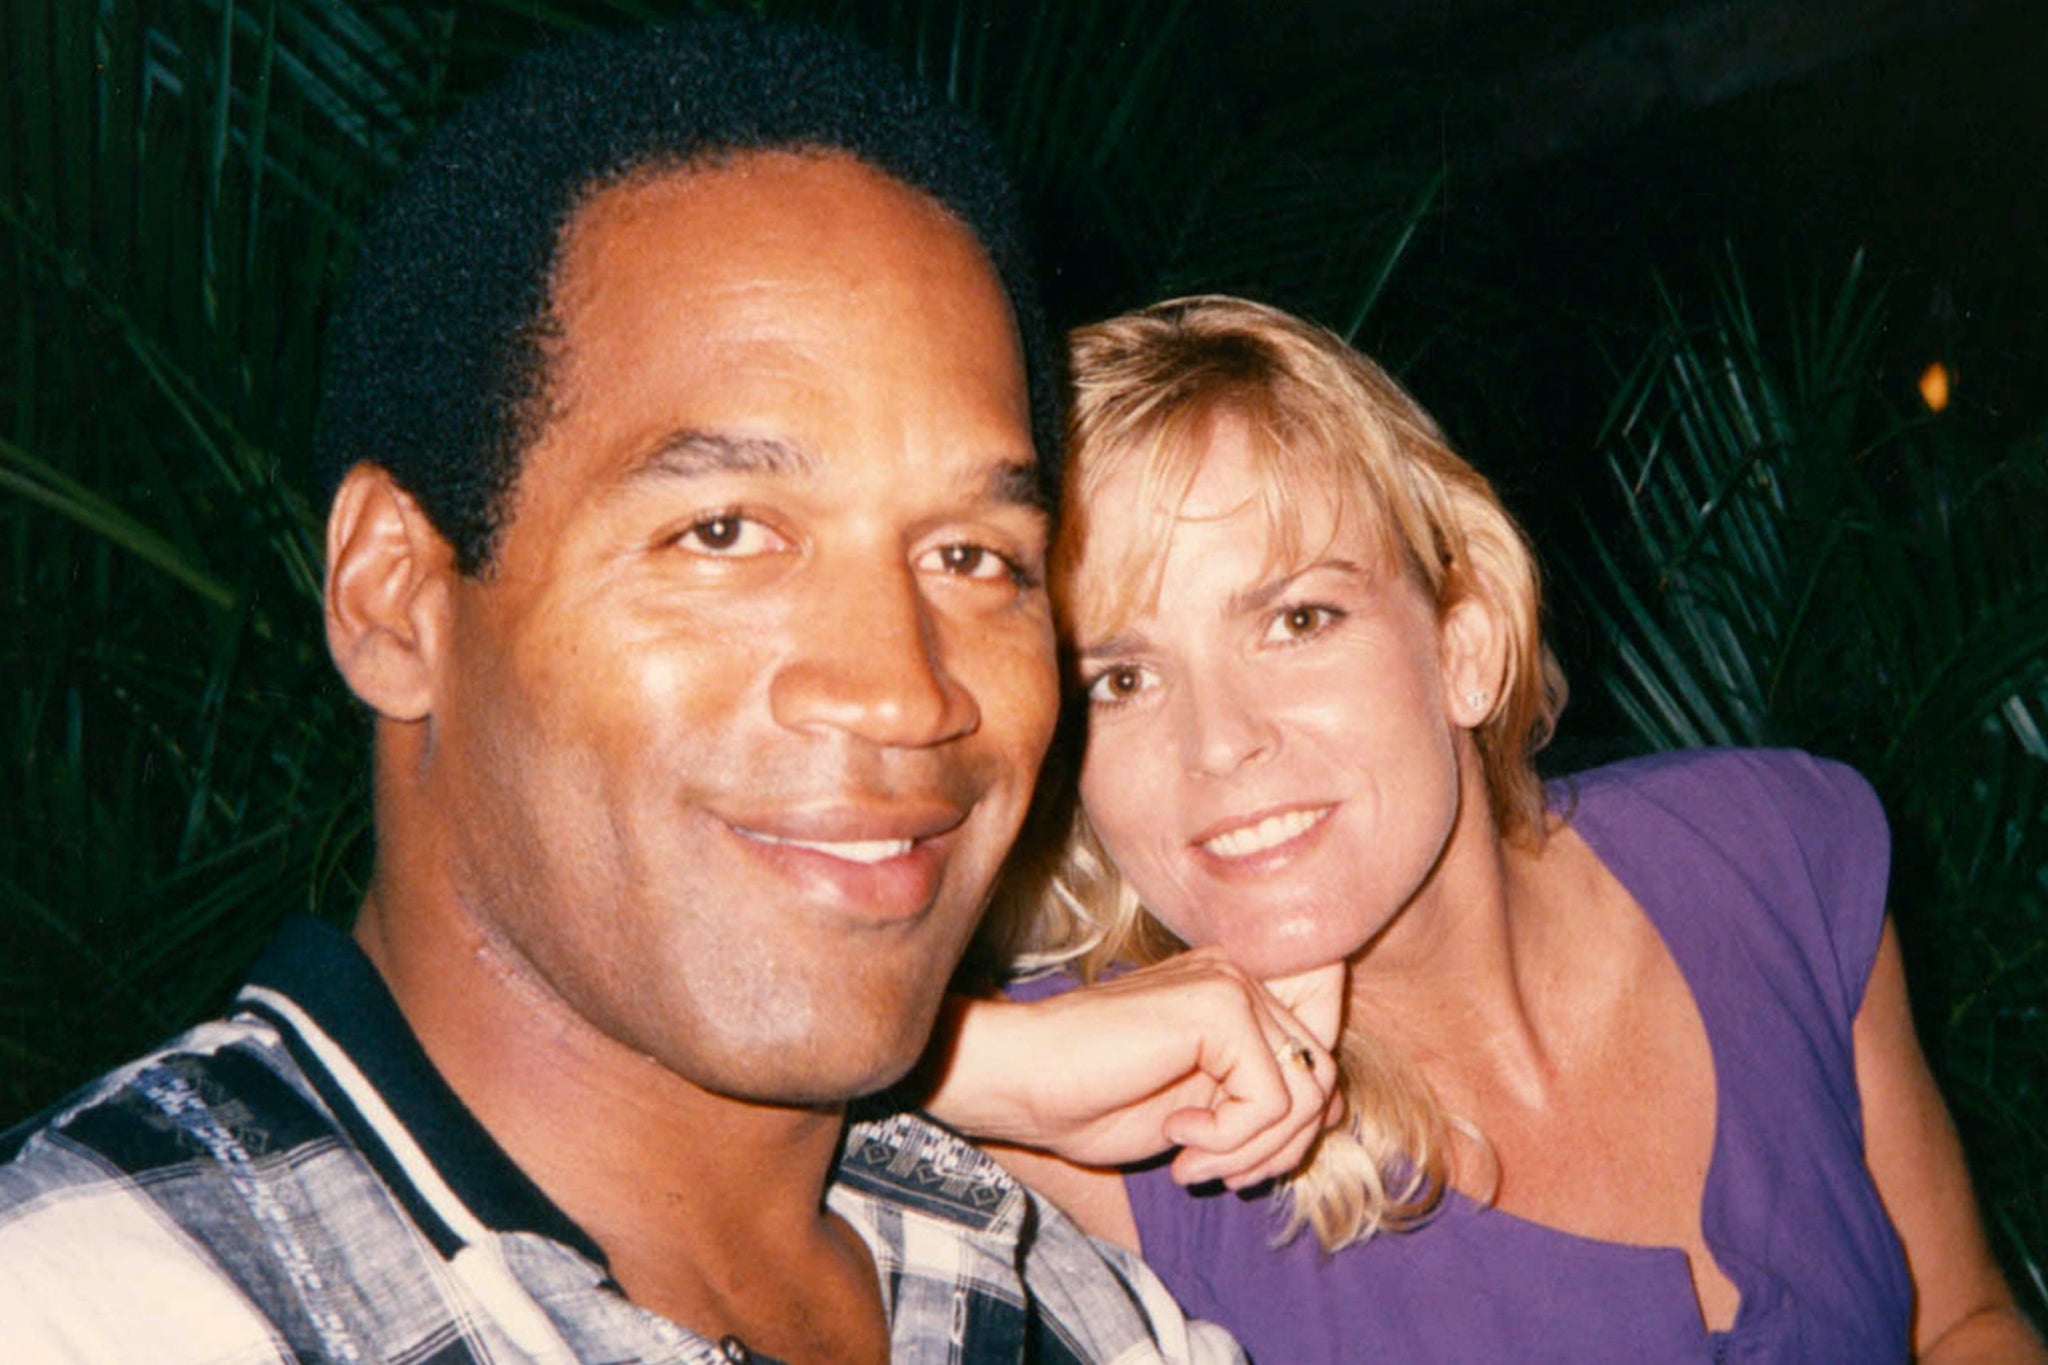 OJ Simpson was acquitted for the murder of his wife Nicole Brown Simpson in 1995; pictured here on vacation in Mexico in 1989